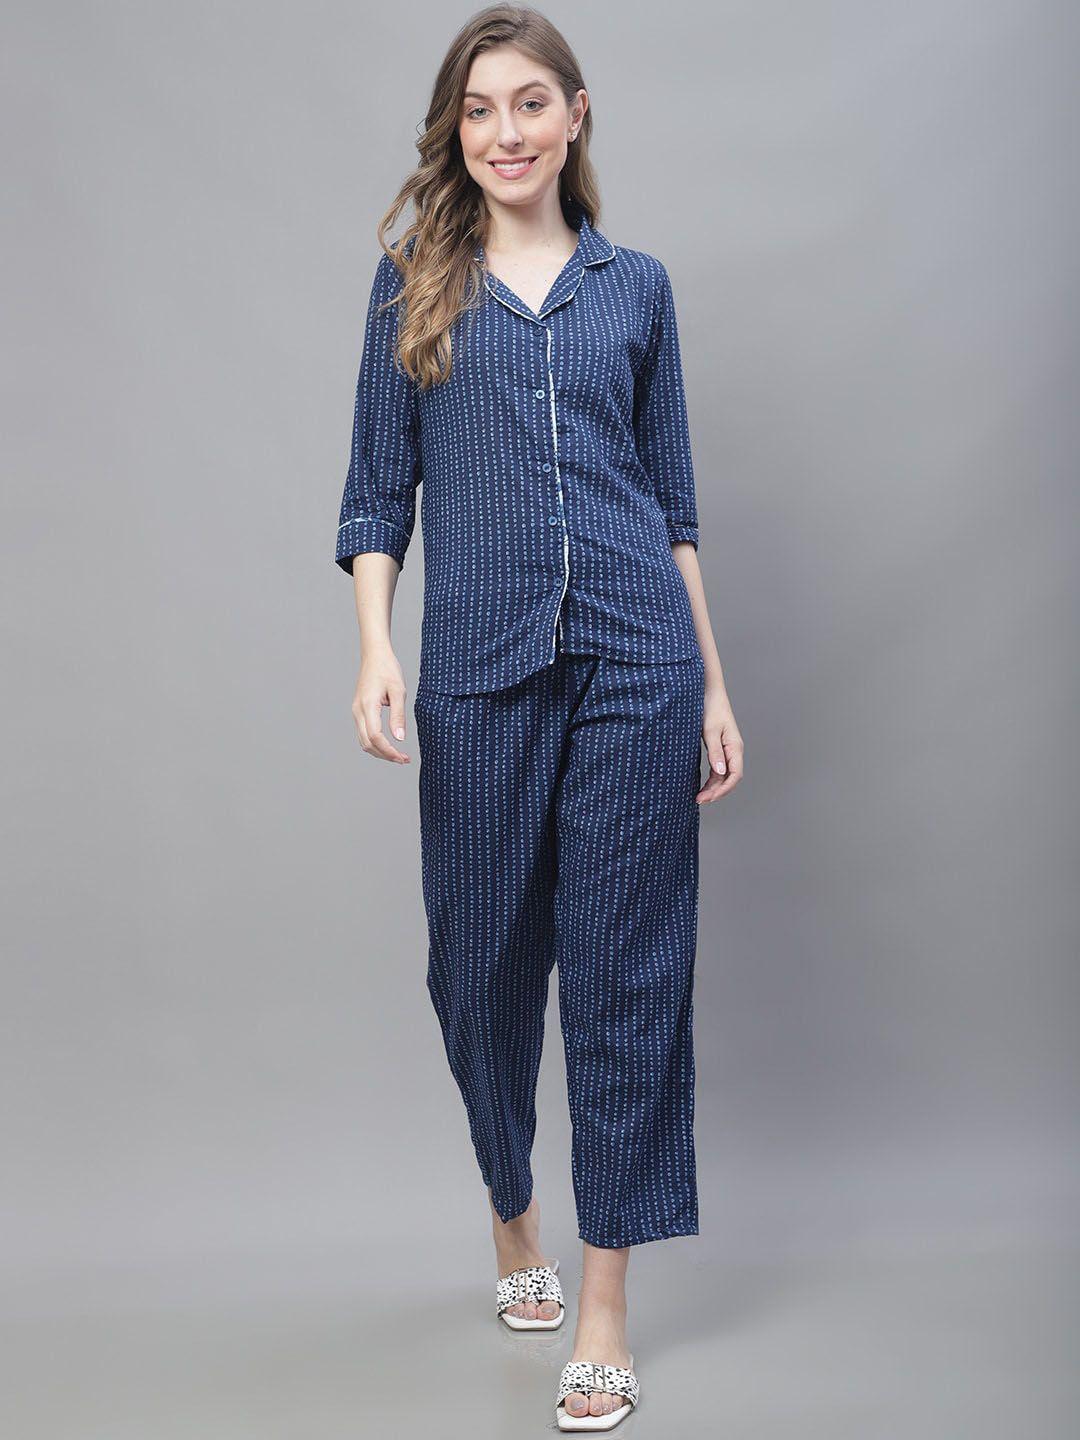 tag 7 striped printed lapel collar pure cotton night suit